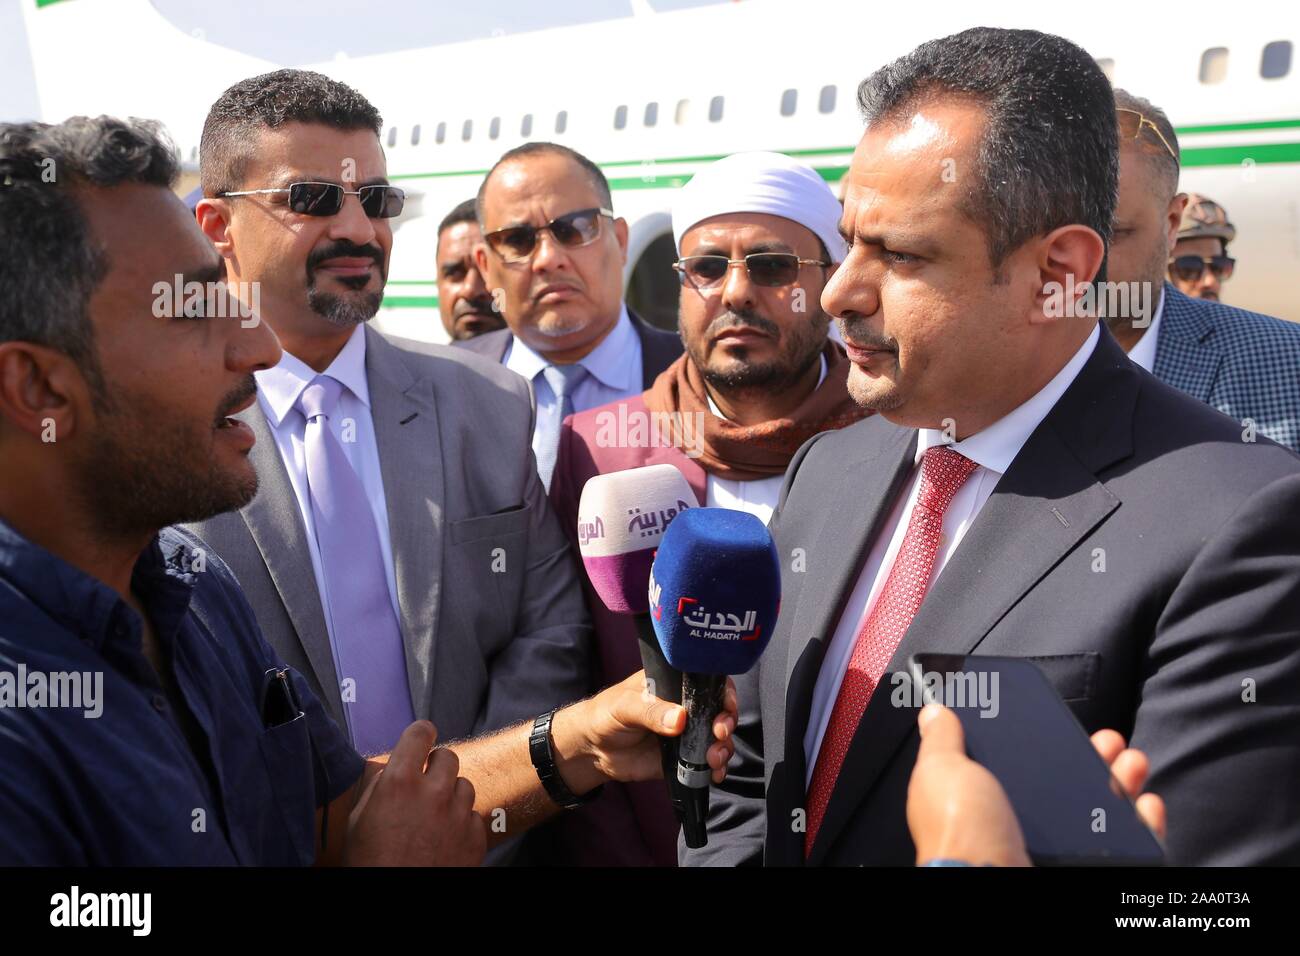 Aden. 18th Nov, 2019. Yemen's Prime Minister Maeen Abdulmalik (R, Front) is interviewed upon his arrival at Aden's International Airport, Yemen, on Nov. 18, 2019. Yemen's Prime Minister Maeen Abdulmalik and other ministers and government officials arrived on Monday in the country's southern port city of Aden. Credit: Xinhua/Alamy Live News Stock Photo